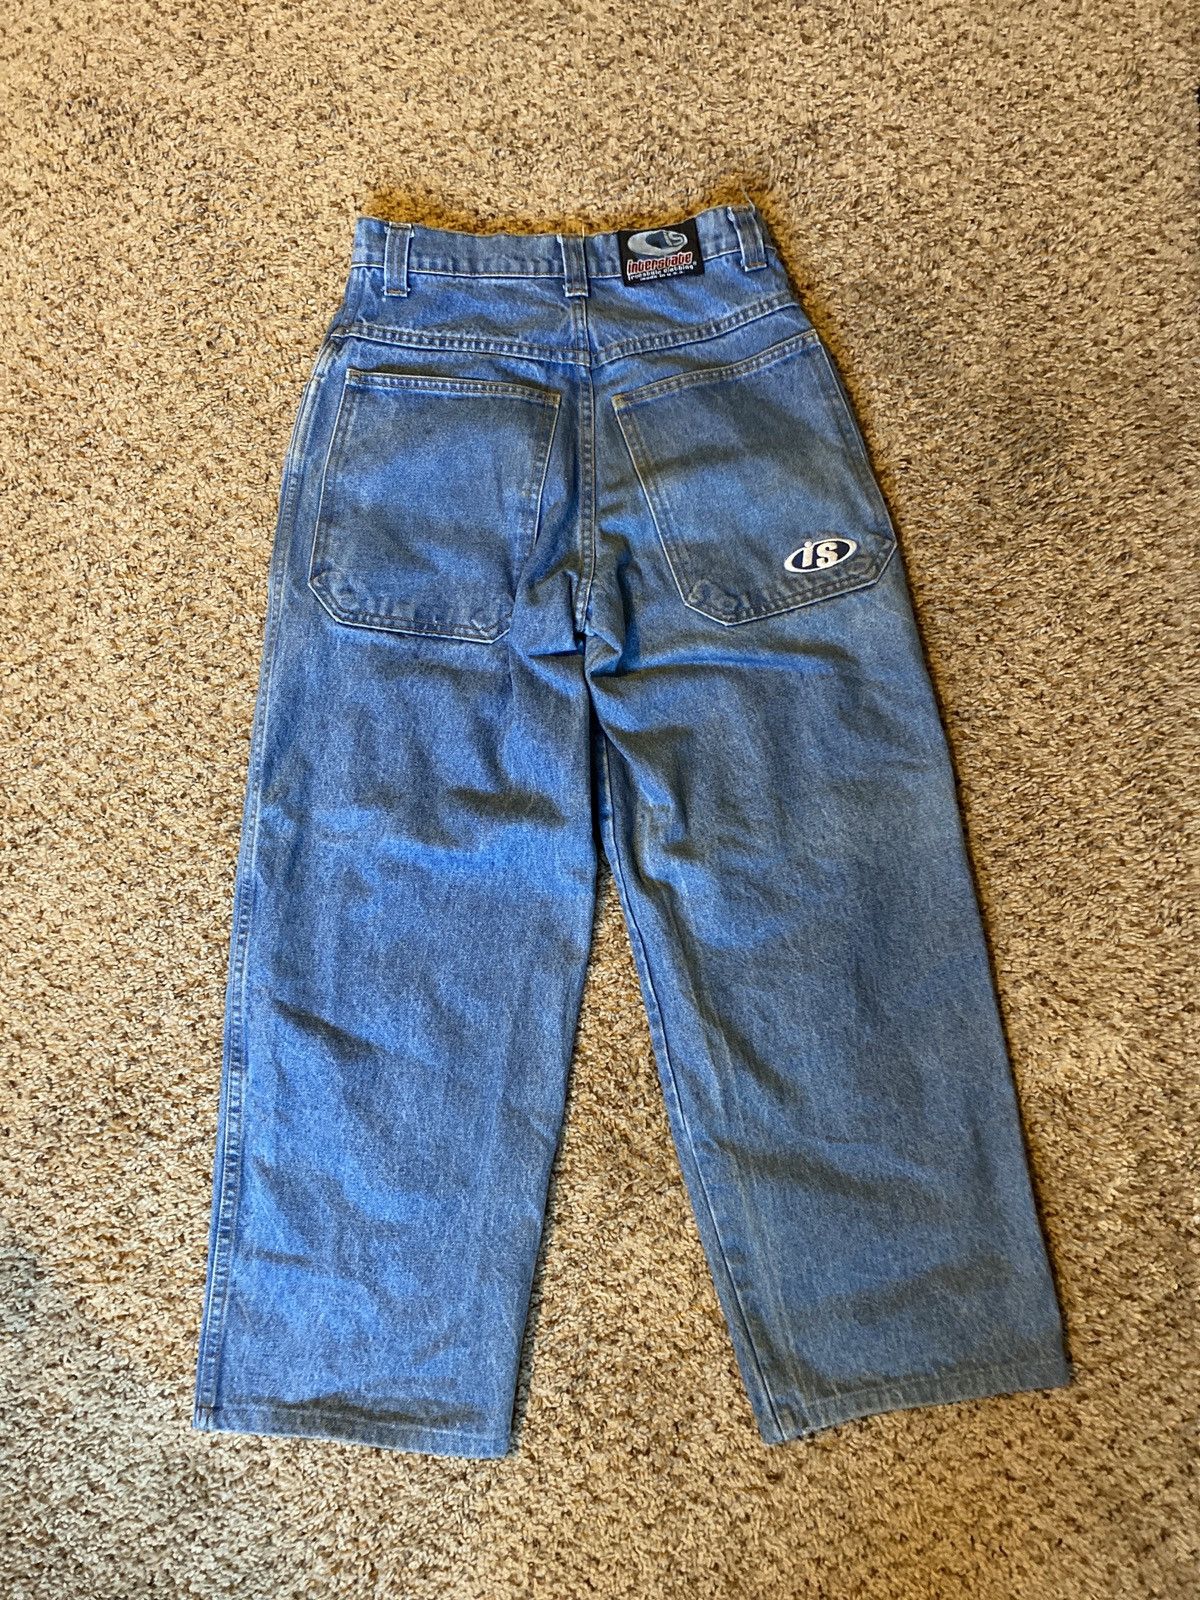 Jnco Interstate 90s jnco jeans | Grailed